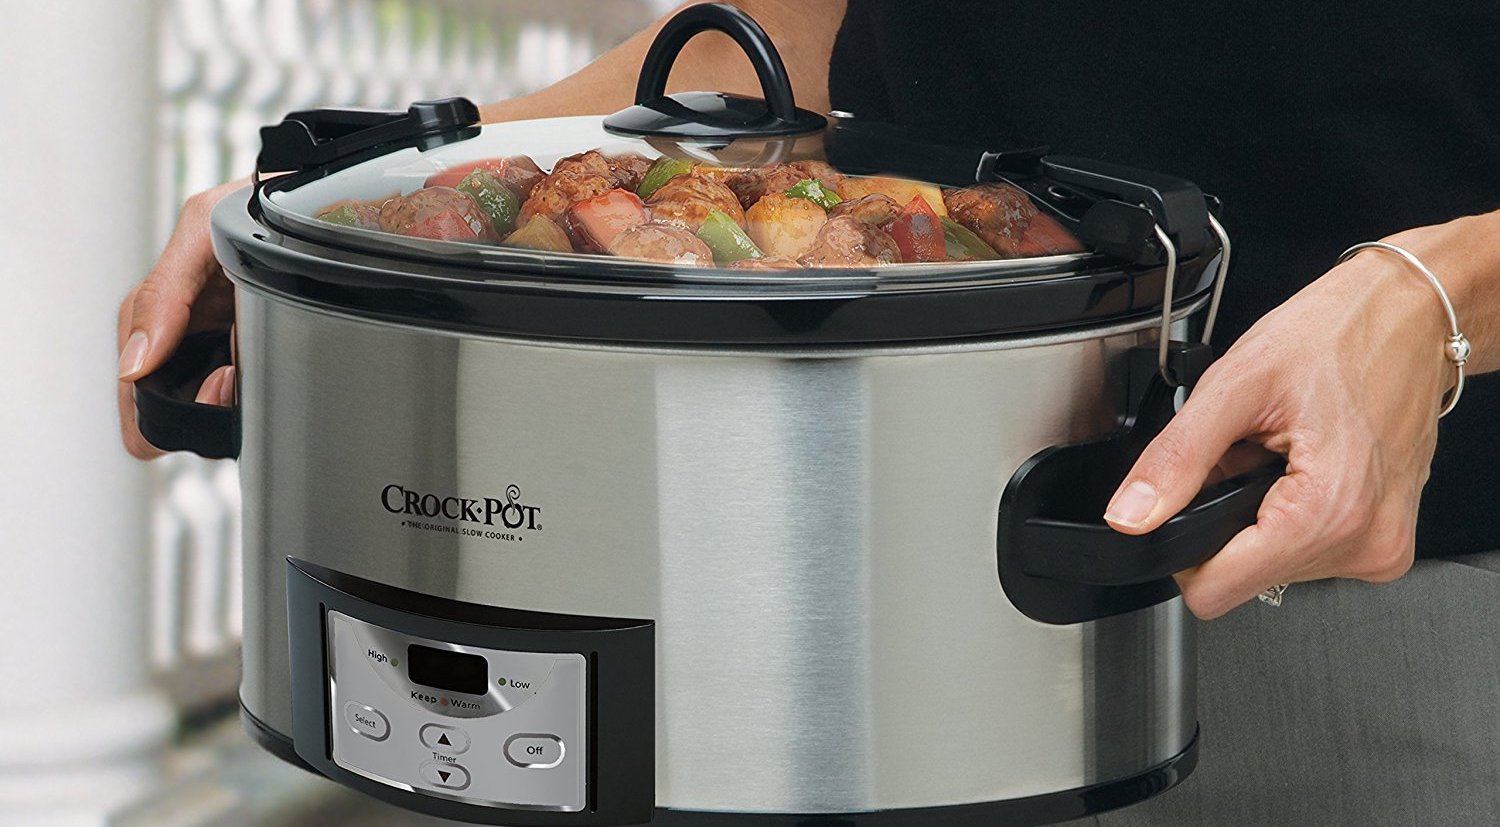 https://9to5toys.com/wp-content/uploads/sites/5/2017/03/crock-pot-6-quart-programmable-cook-and-carry-oval-slow-cooker.jpg?quality=82&strip=all